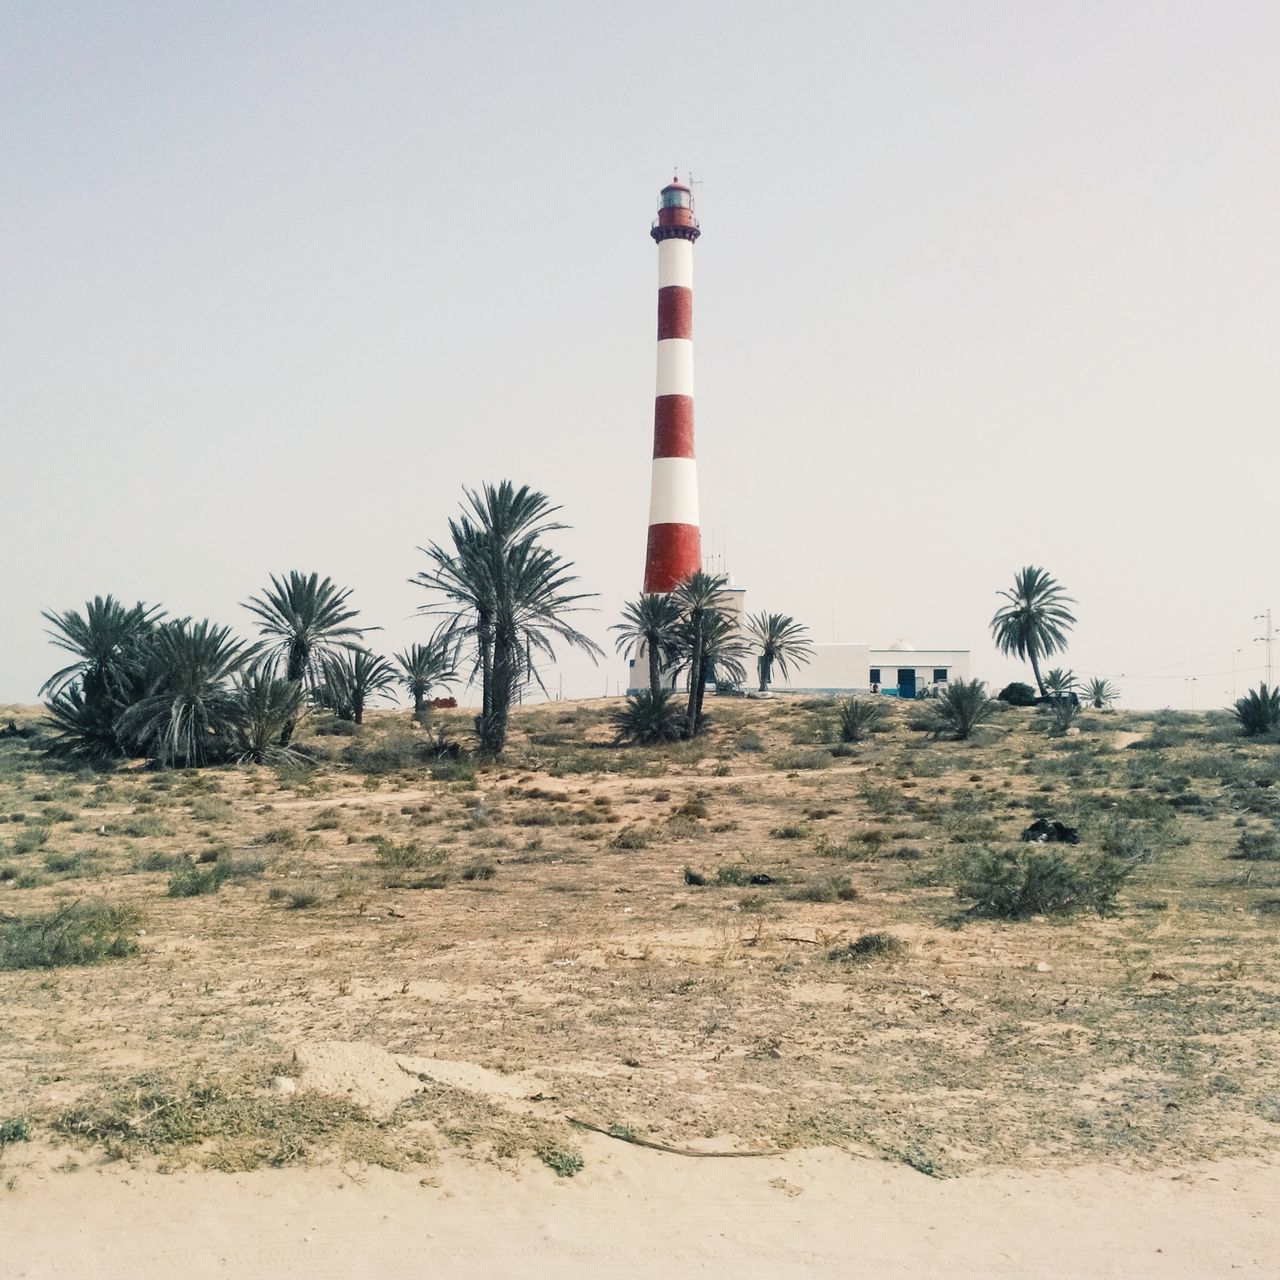 guidance, lighthouse, direction, clear sky, architecture, built structure, building exterior, copy space, tree, safety, protection, tower, sand, sky, tranquility, landscape, day, nature, beach, security